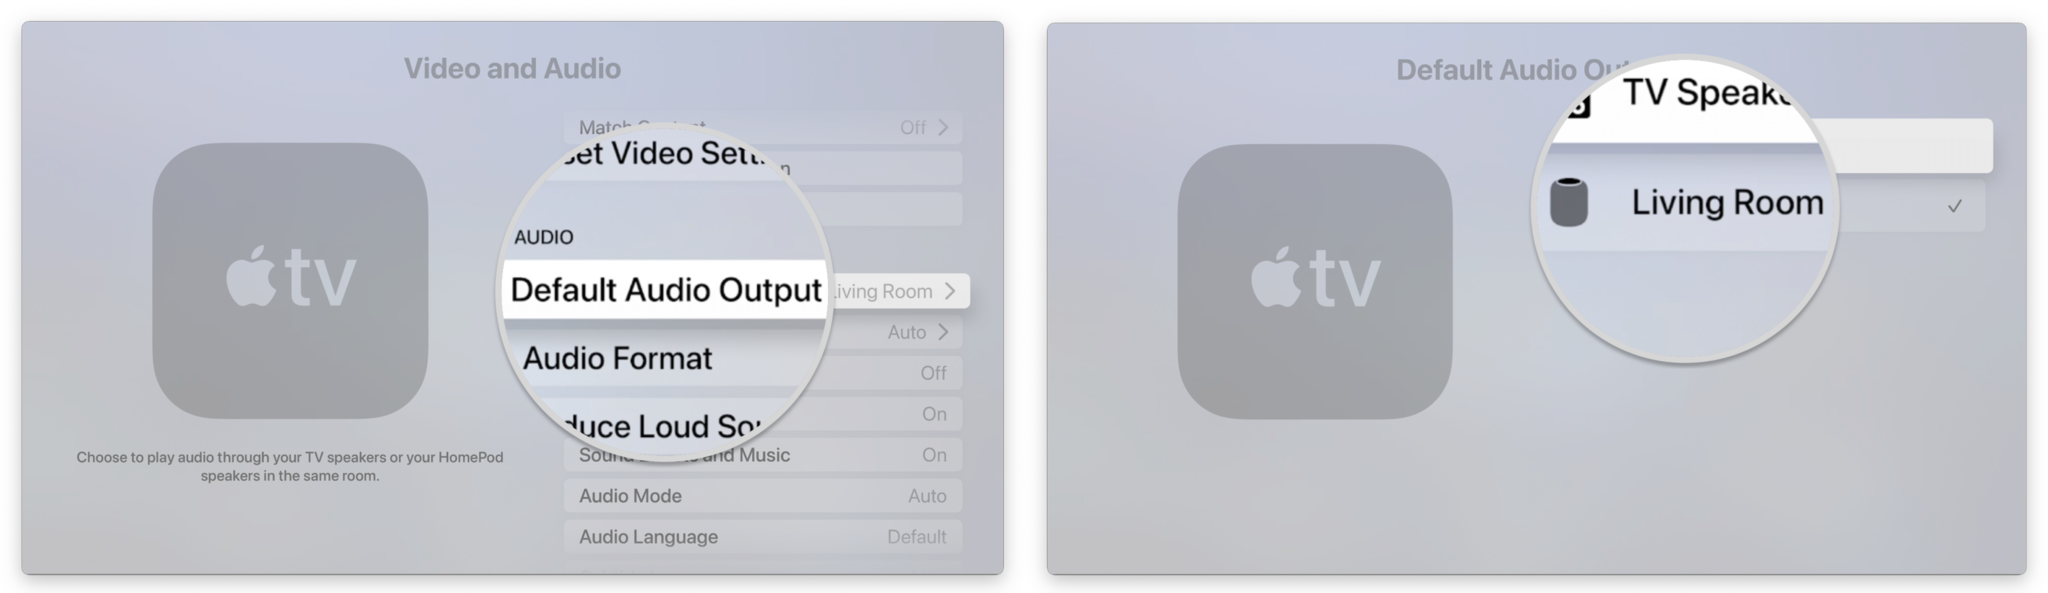 How to set your HomePod as your default speaker on Apple TV 4K by showing steps: Click Default Audio Output, Select your HomePod with a click